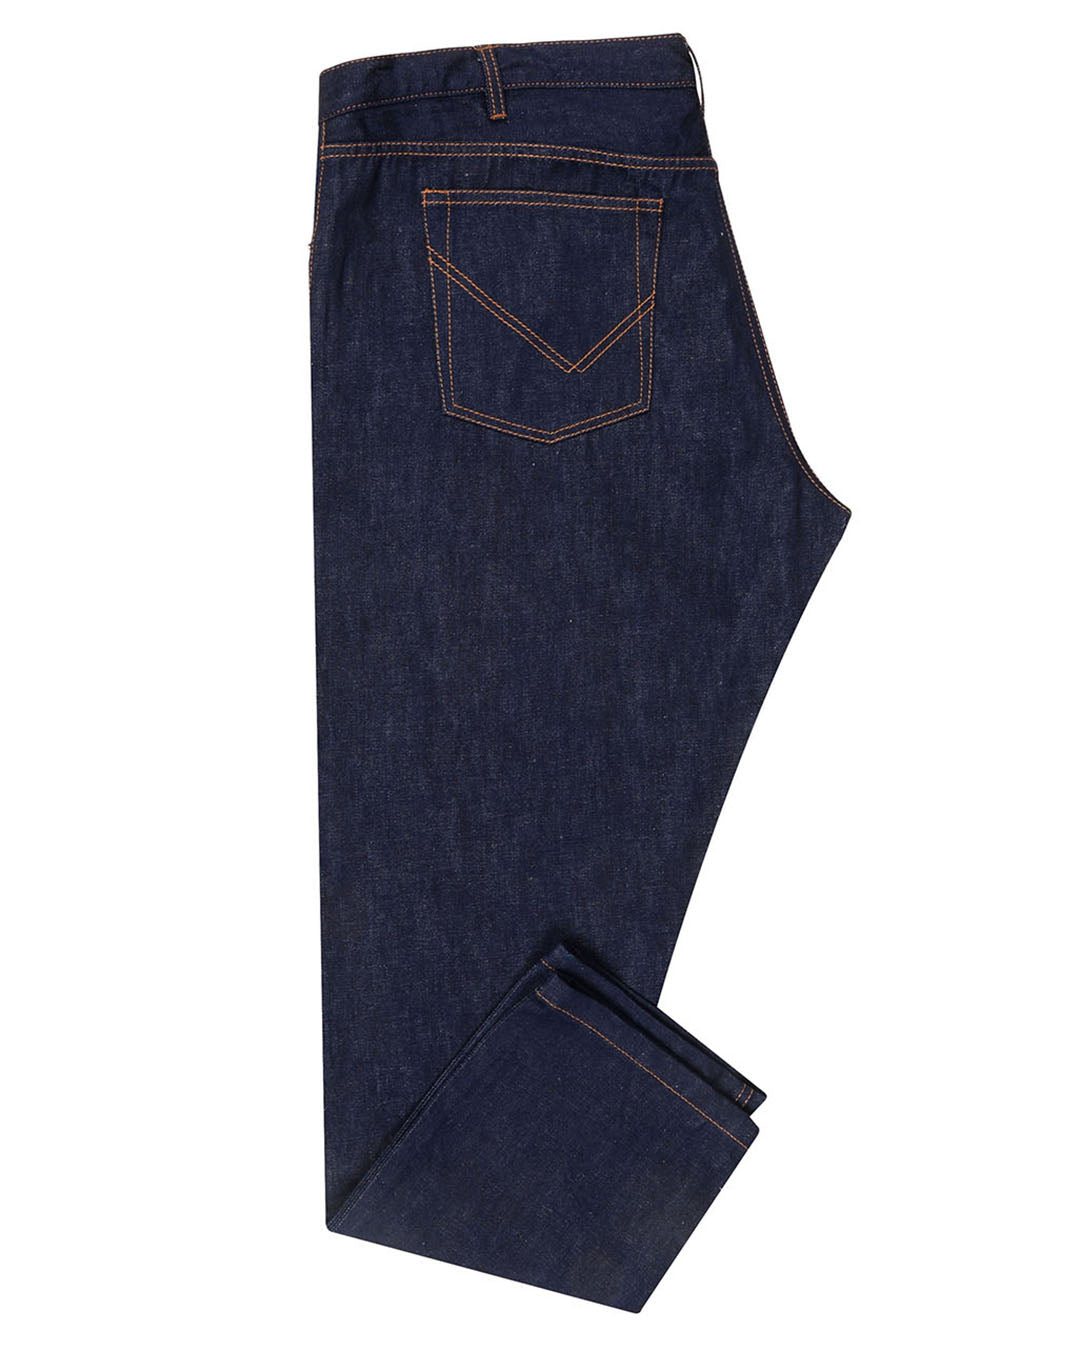 Side view of custom linen cotton jeans for men by Luxire in indigo